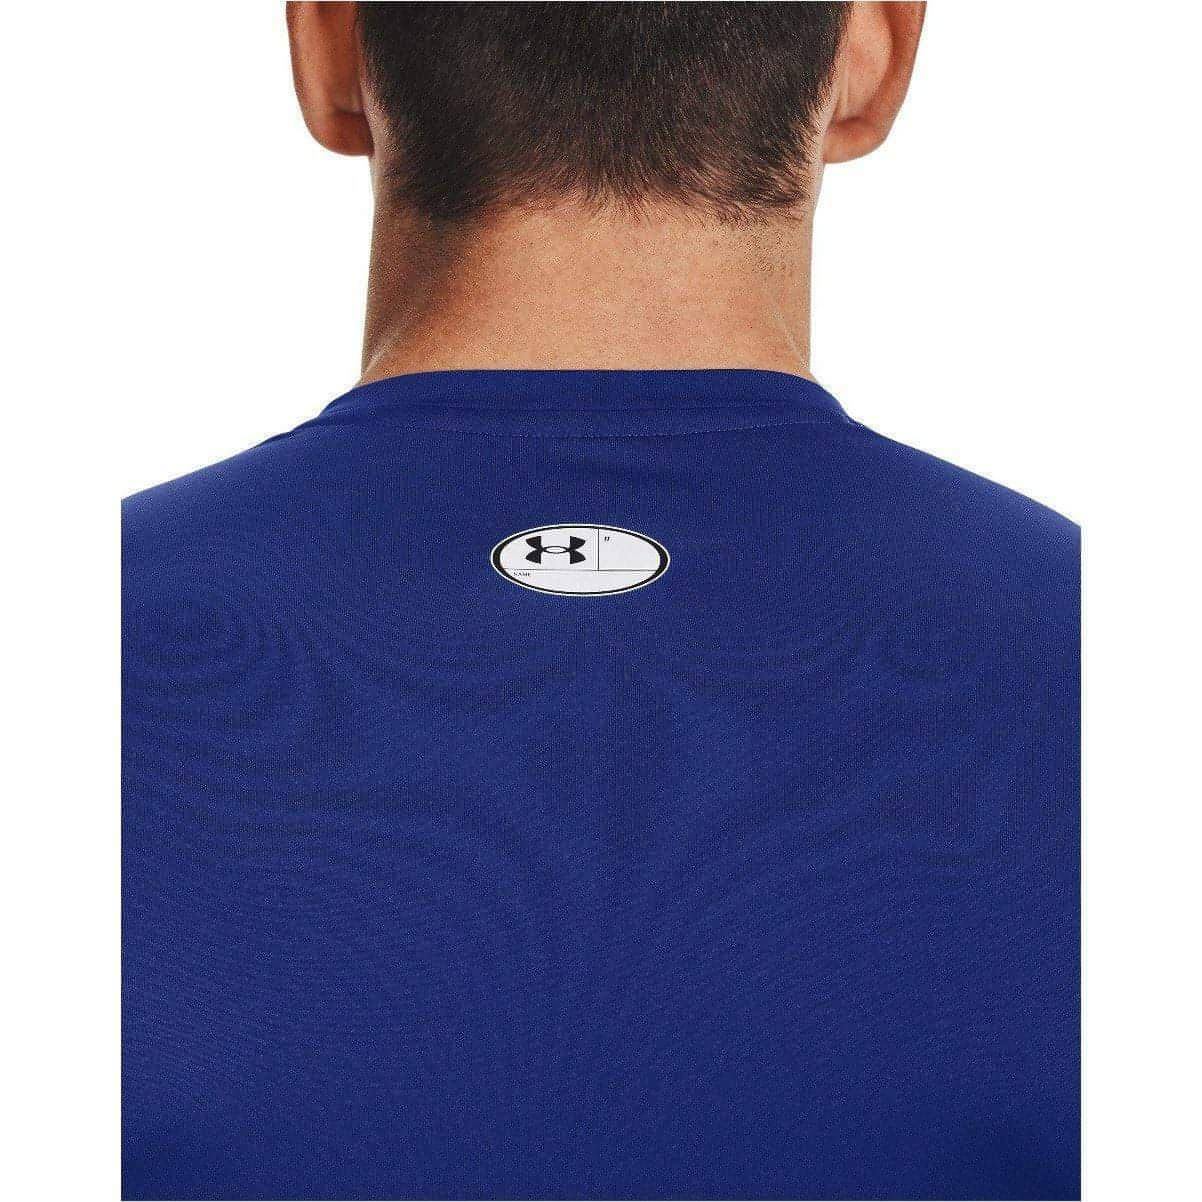 Under Armour Adults Heatgear Armour Compression Long Sleeve Top - Blue